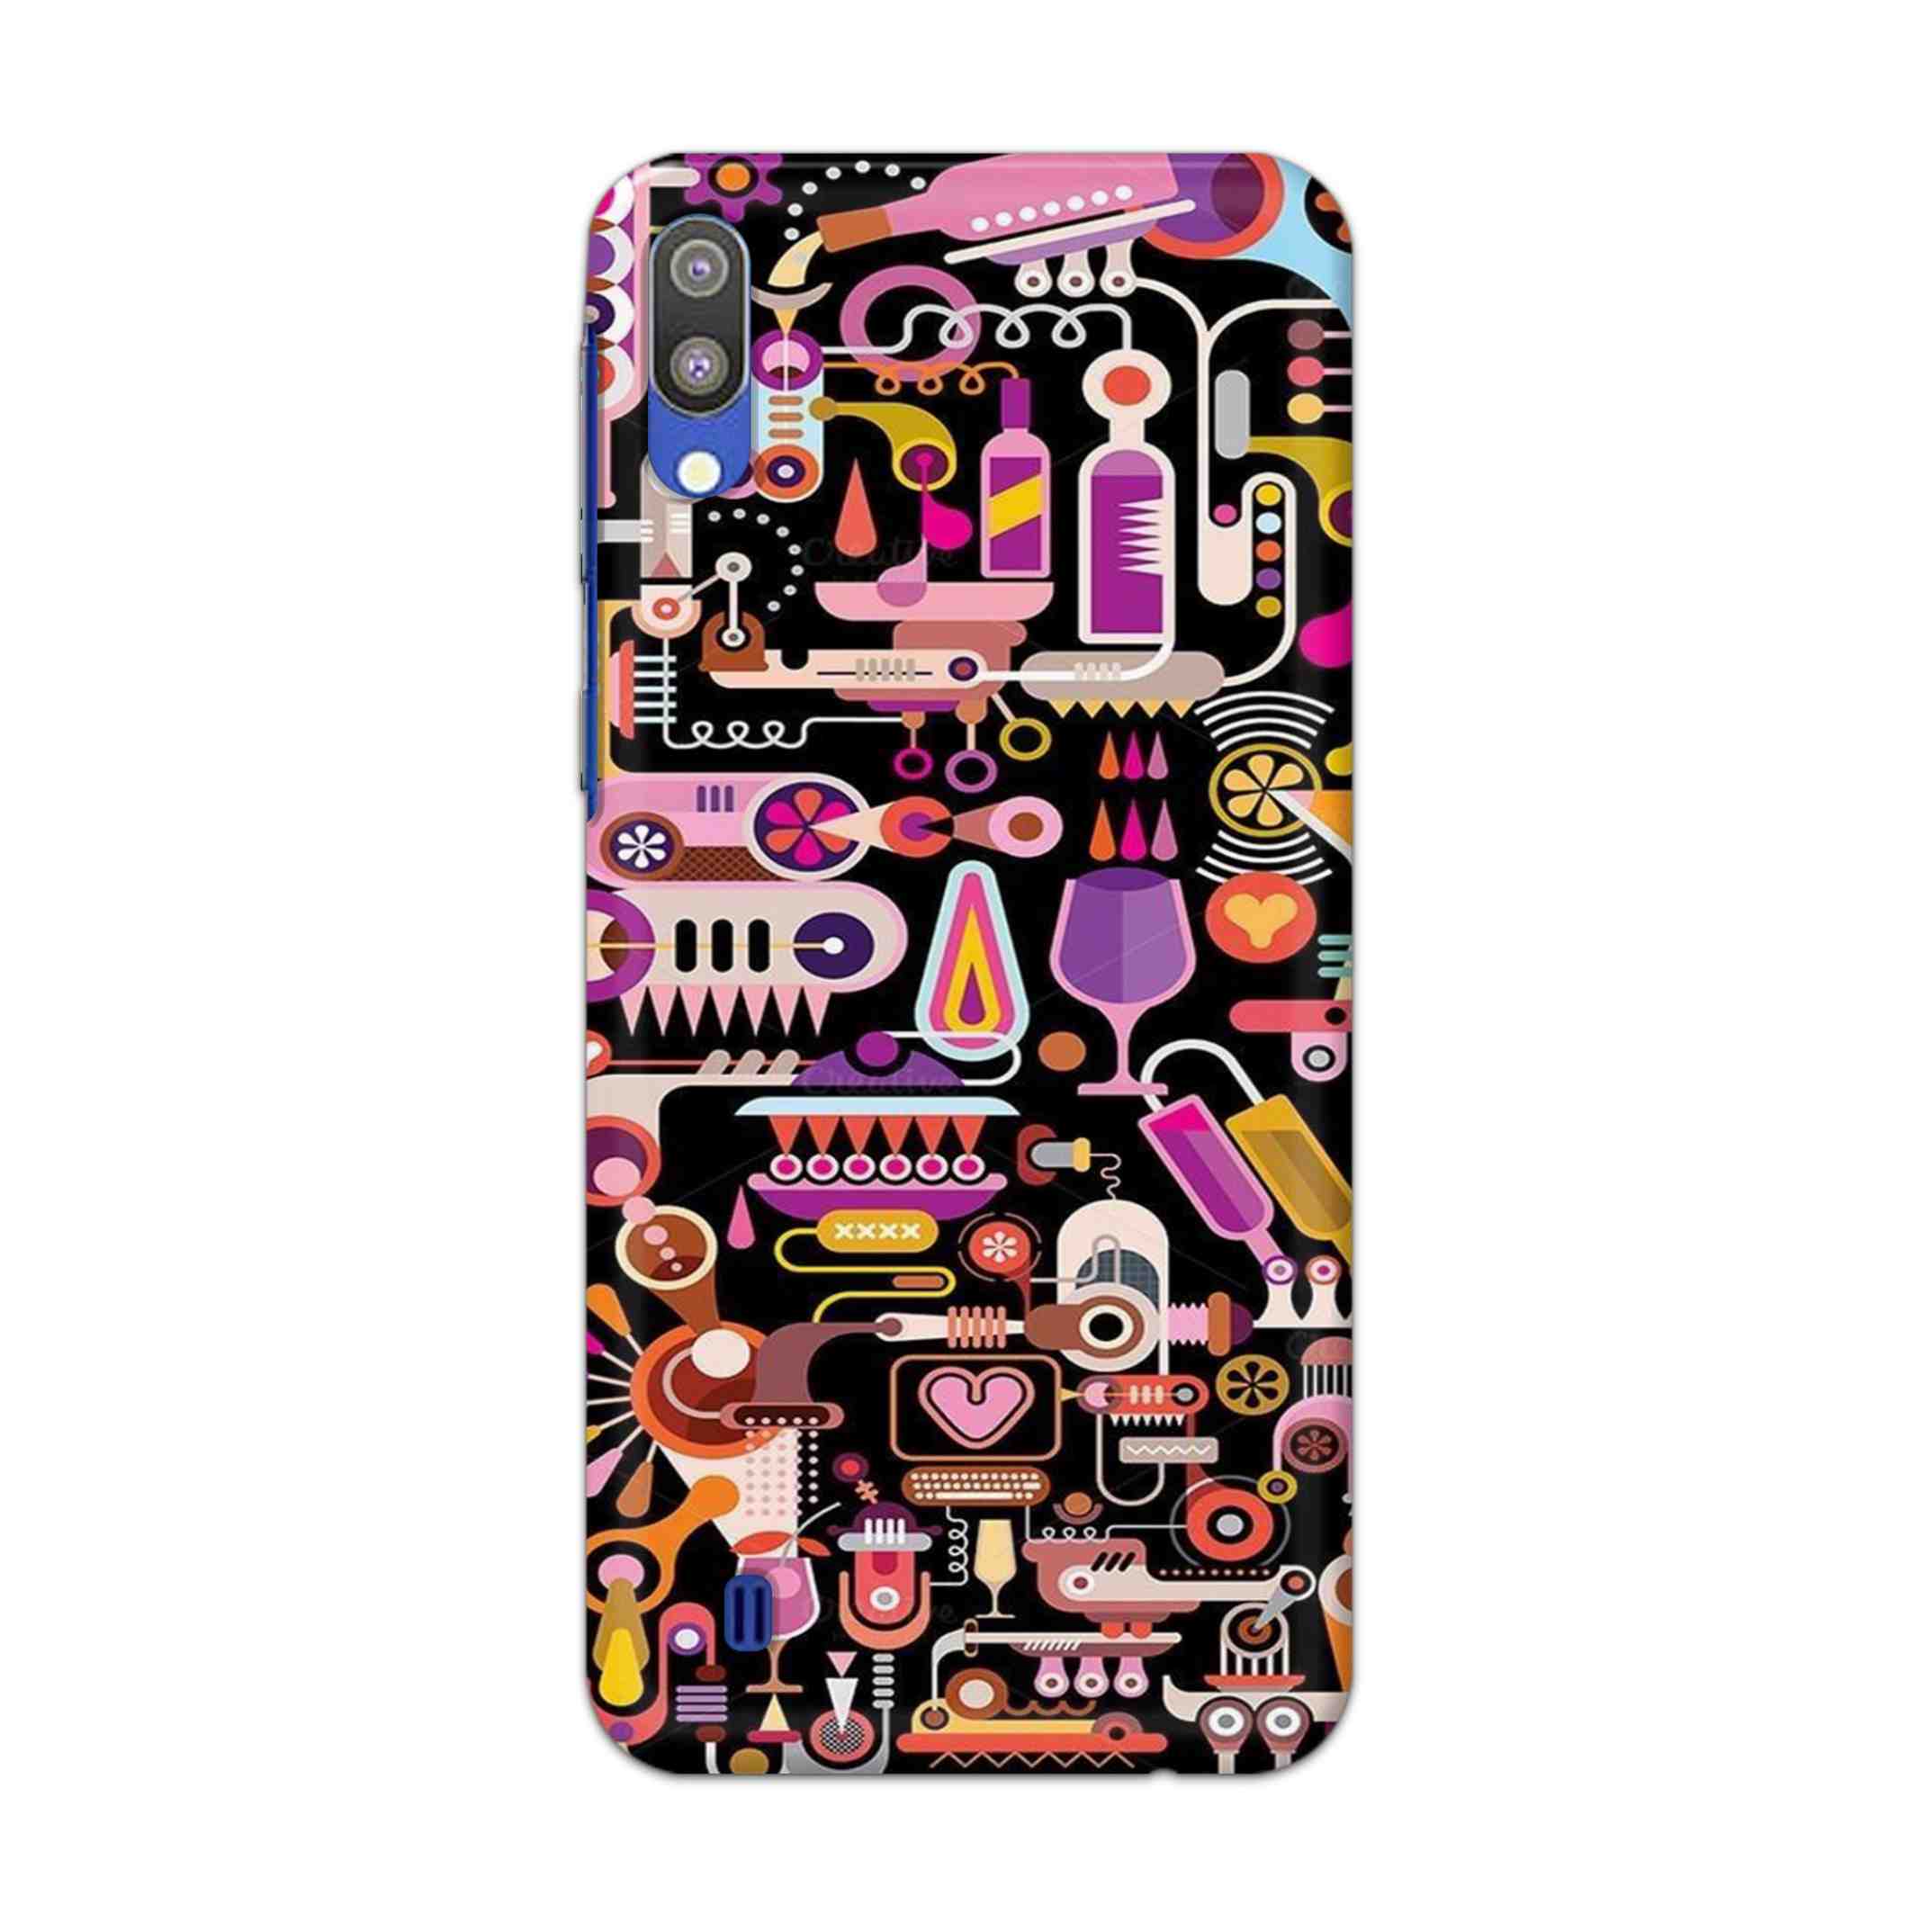 Buy Lab Art Hard Back Mobile Phone Case Cover For Samsung Galaxy M10 Online